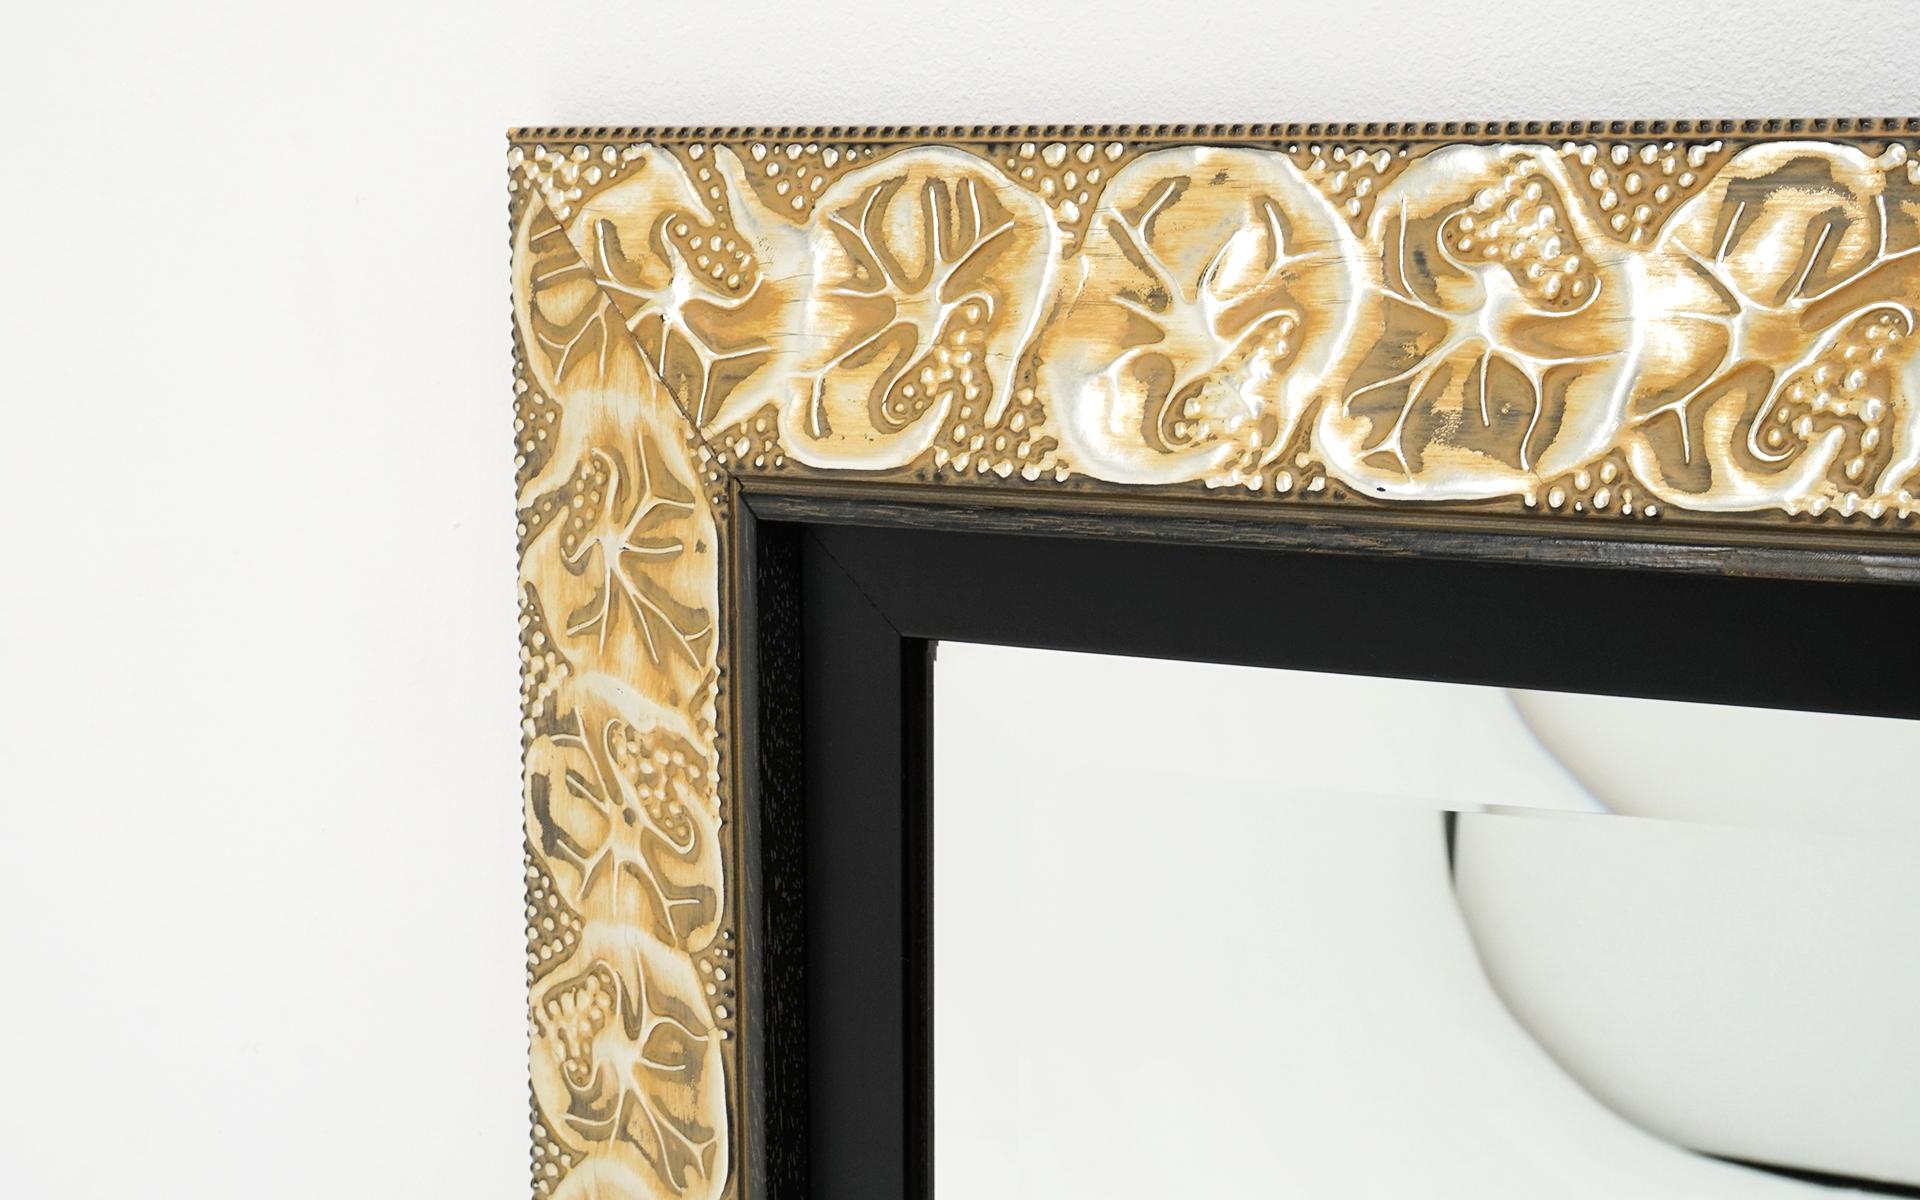 American Beveled Repoussé Wall Mirror. Reverse Hammered Anodized Aluminum Frame For Sale